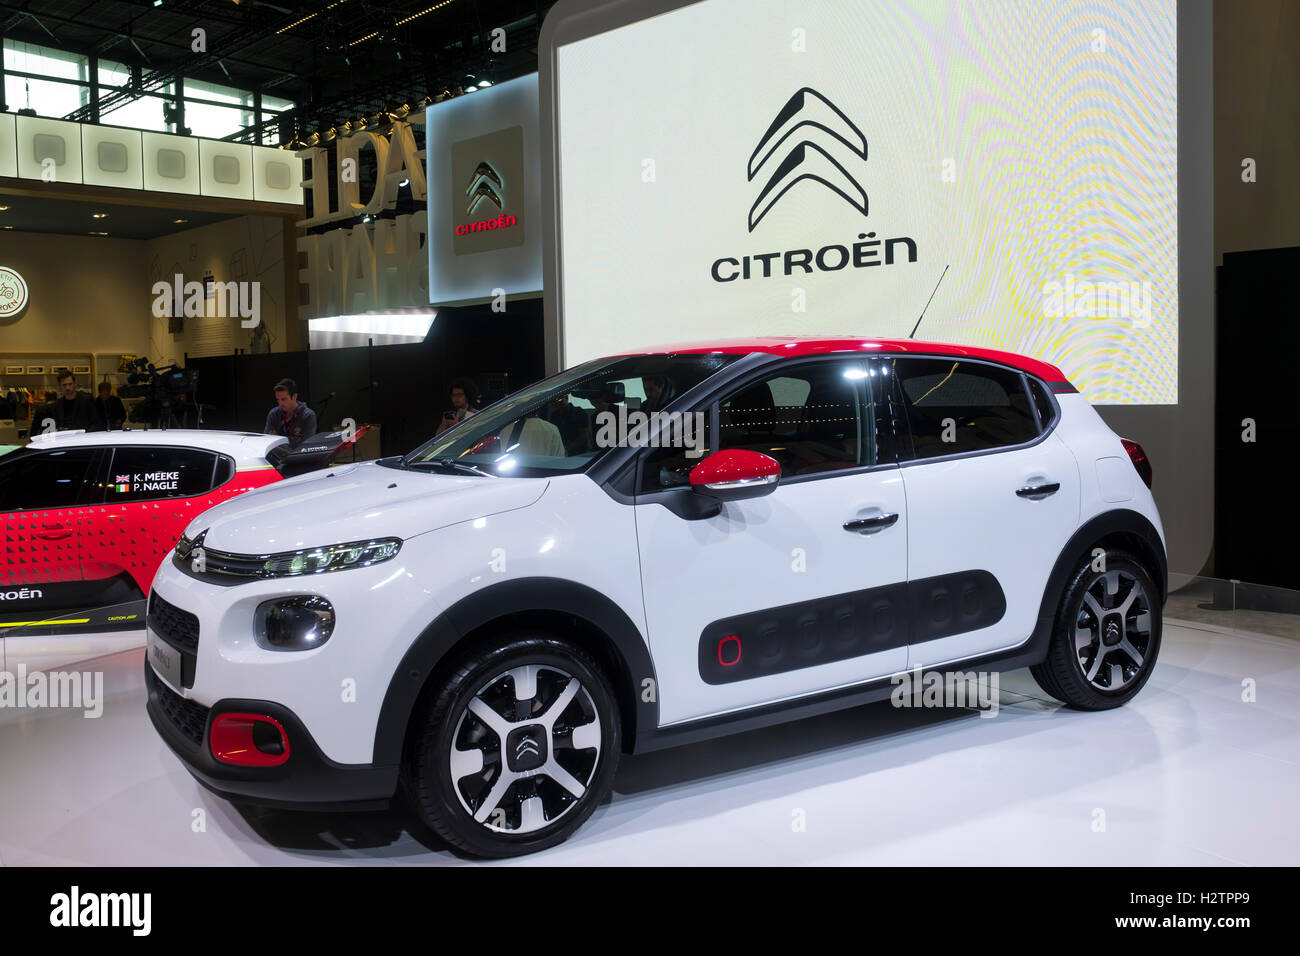 Citroen stand with new C3 at Paris Motor Show 2016 Stock Photo